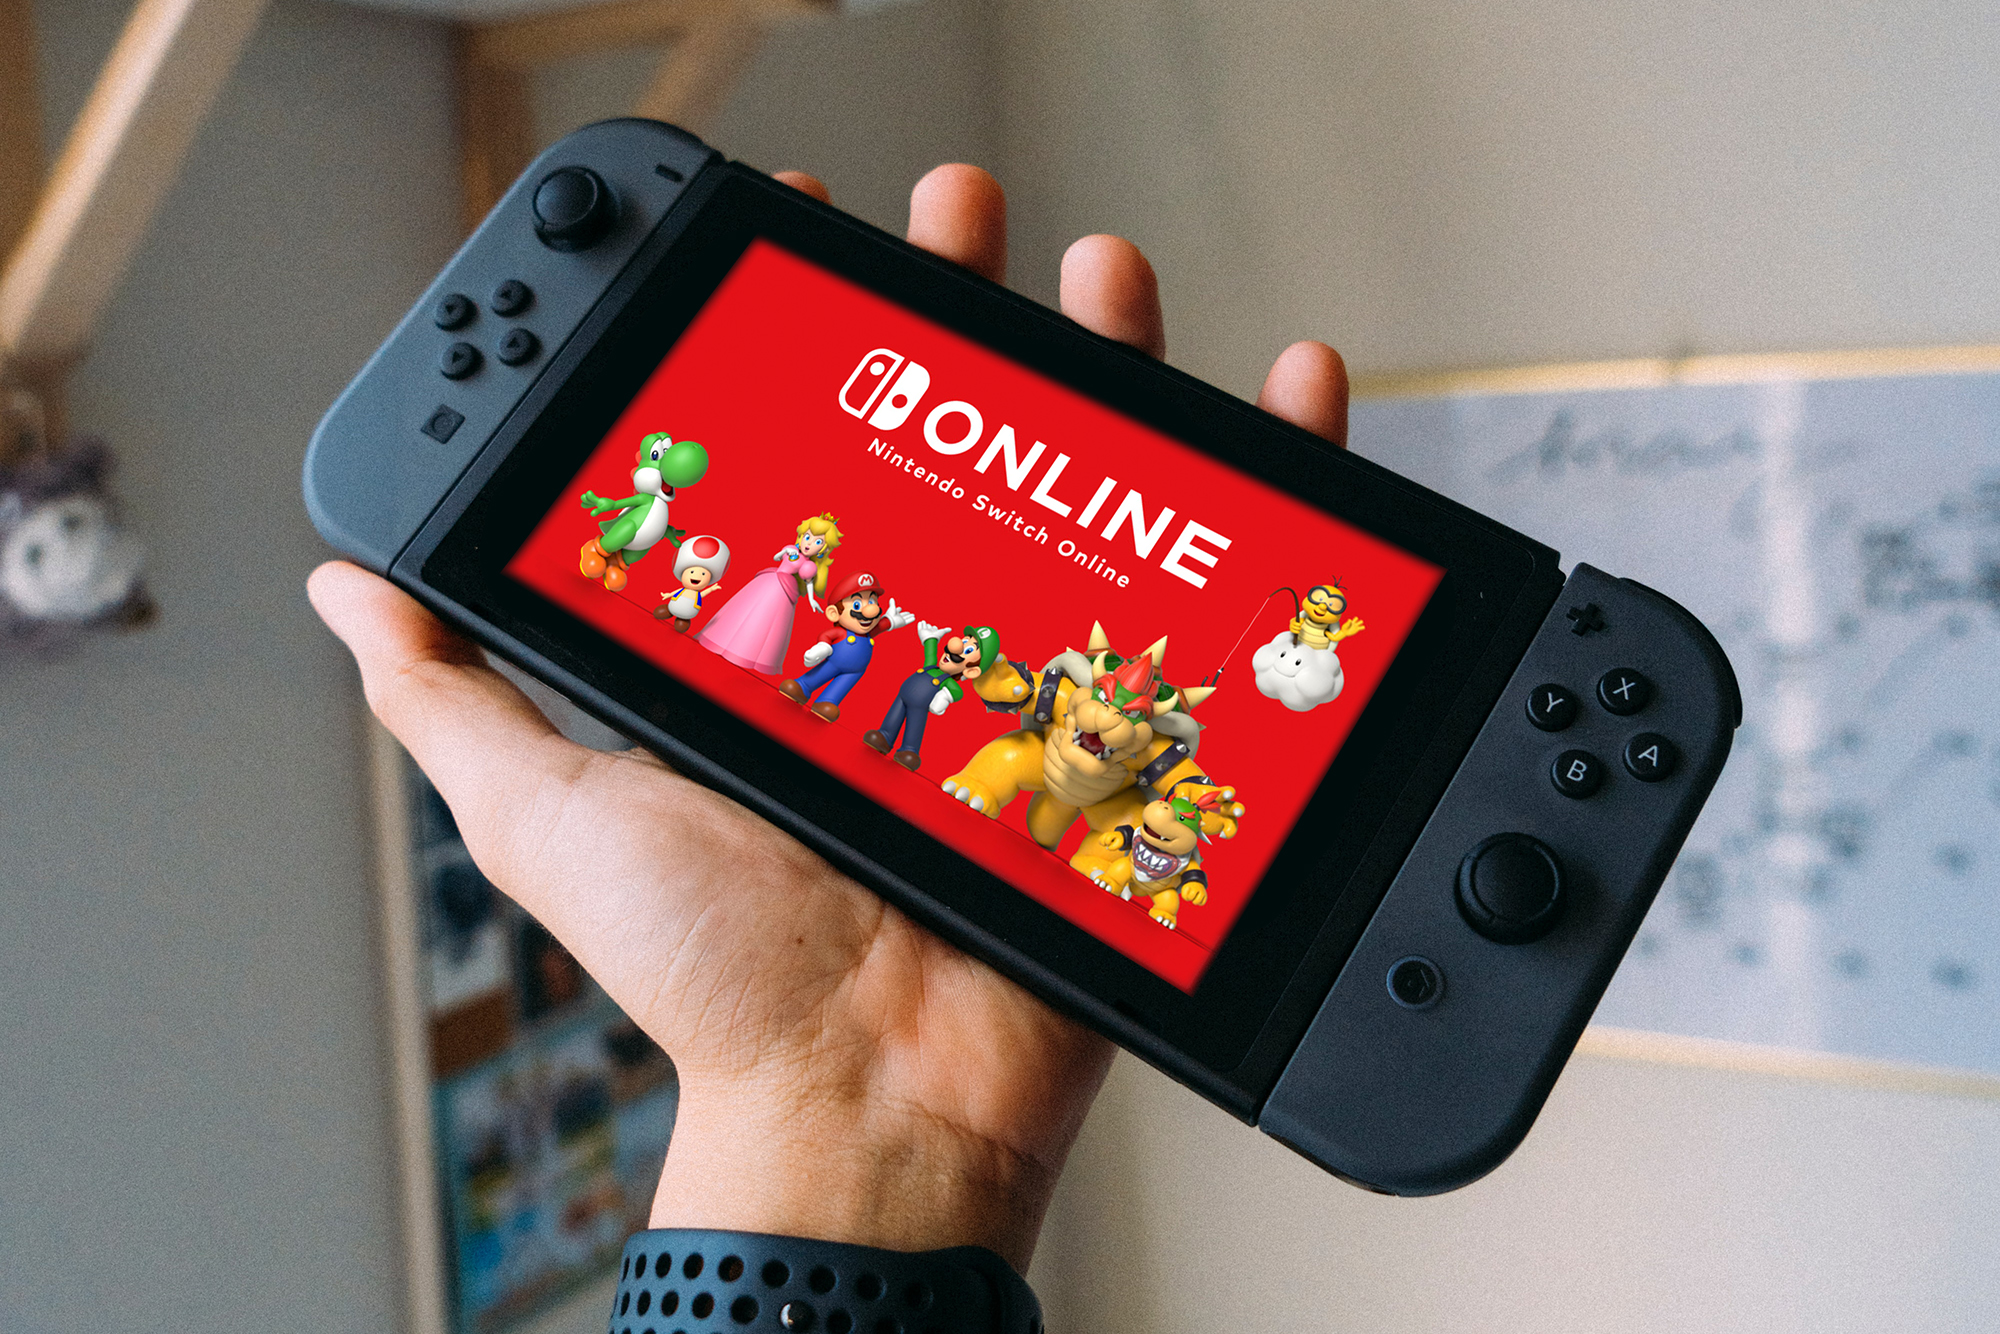 THE BIG UPDATE in 2023: Nintendo Switch Online Expansion Pack